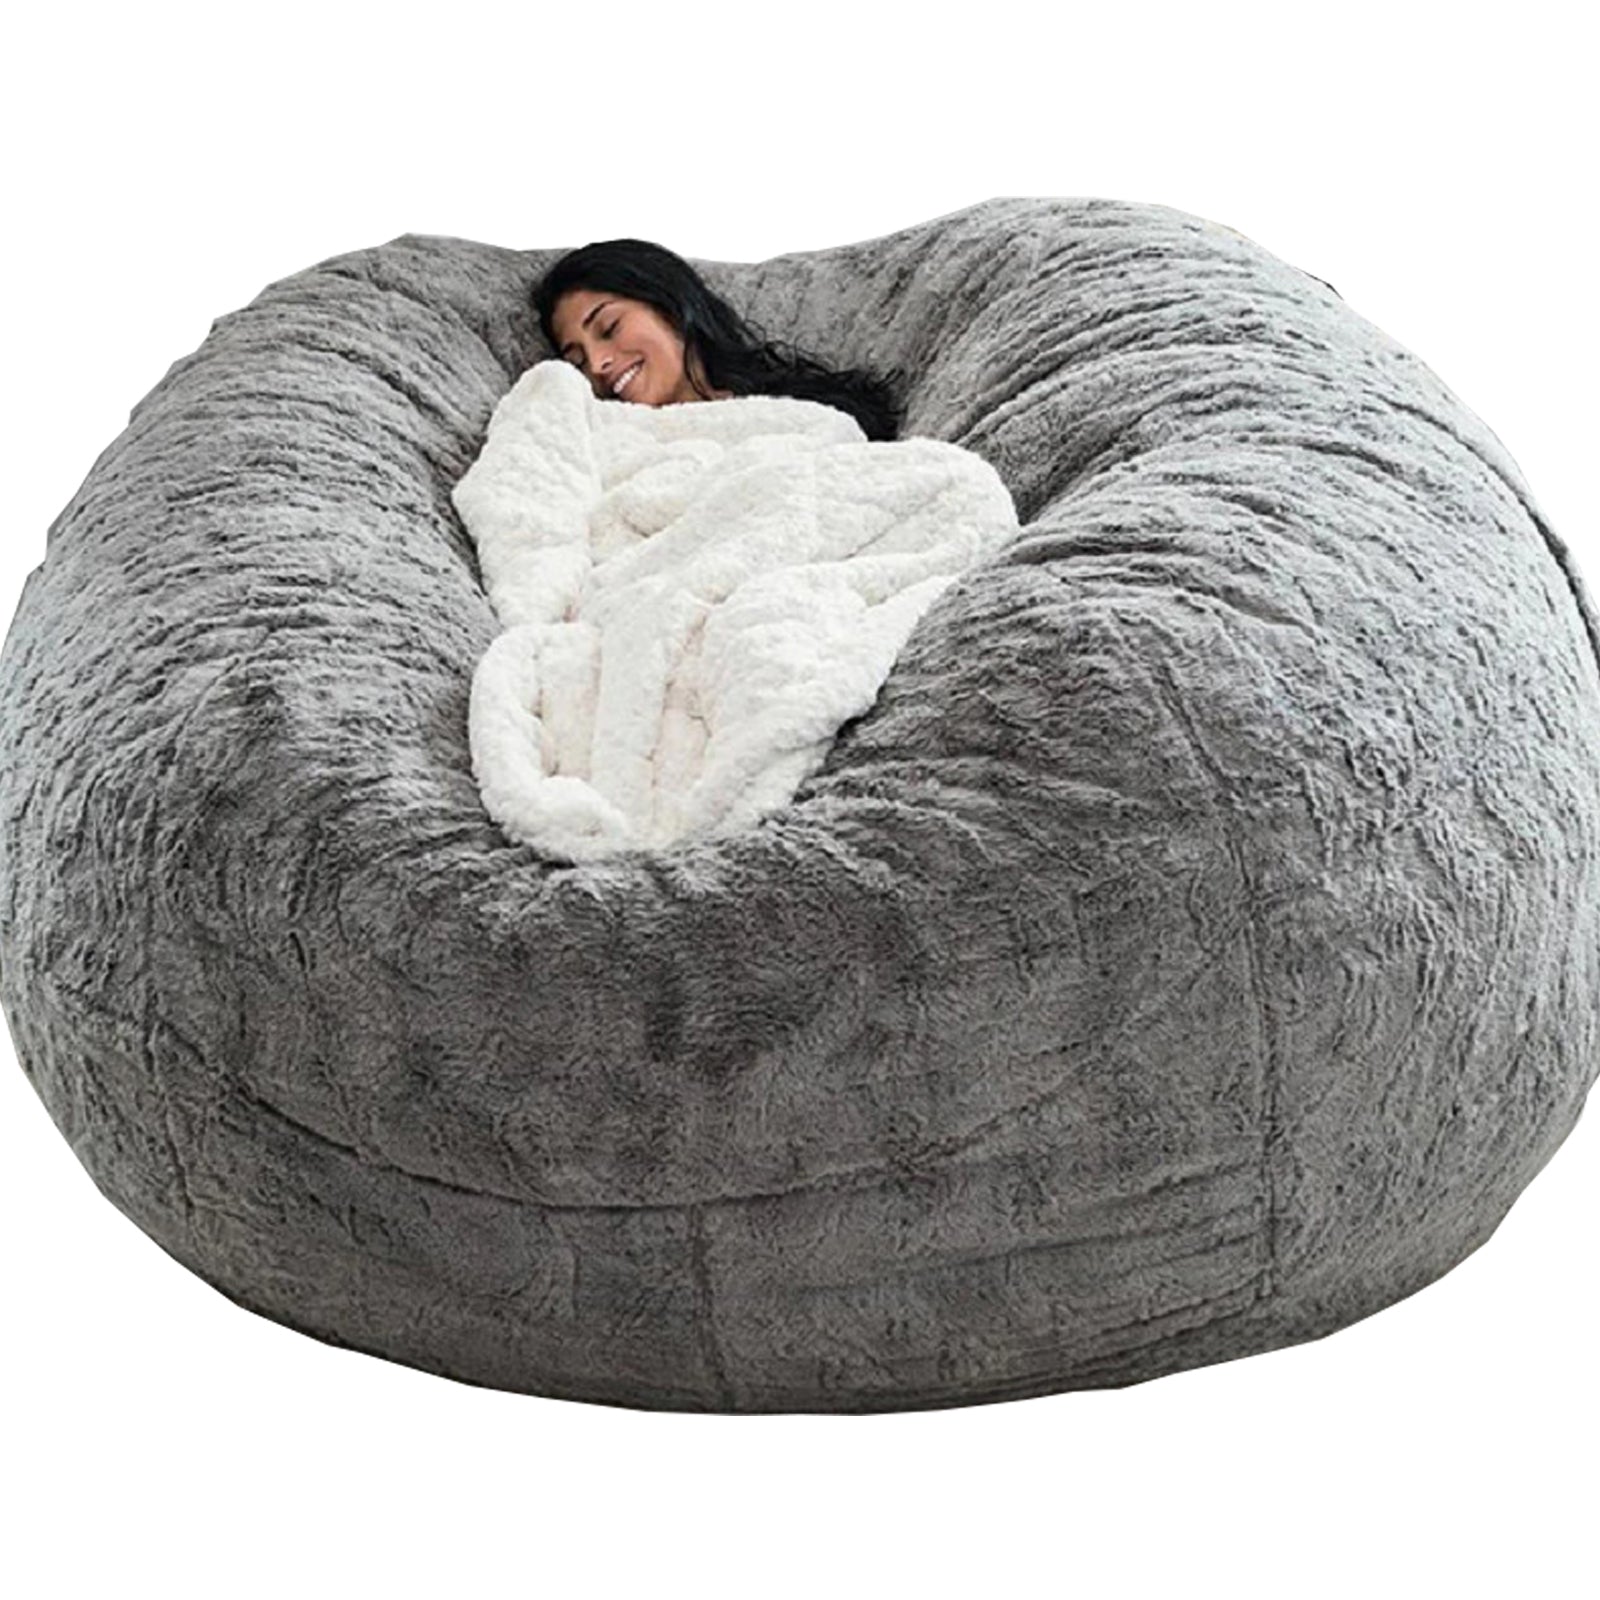 Bean Bag Chair Cover Chair Cushion, Multifunctional Bean Bag Chair, Soft And Comfortable Bean Bag Cover, Living Room Bedroom Furniture (Cover Only, No Filler)